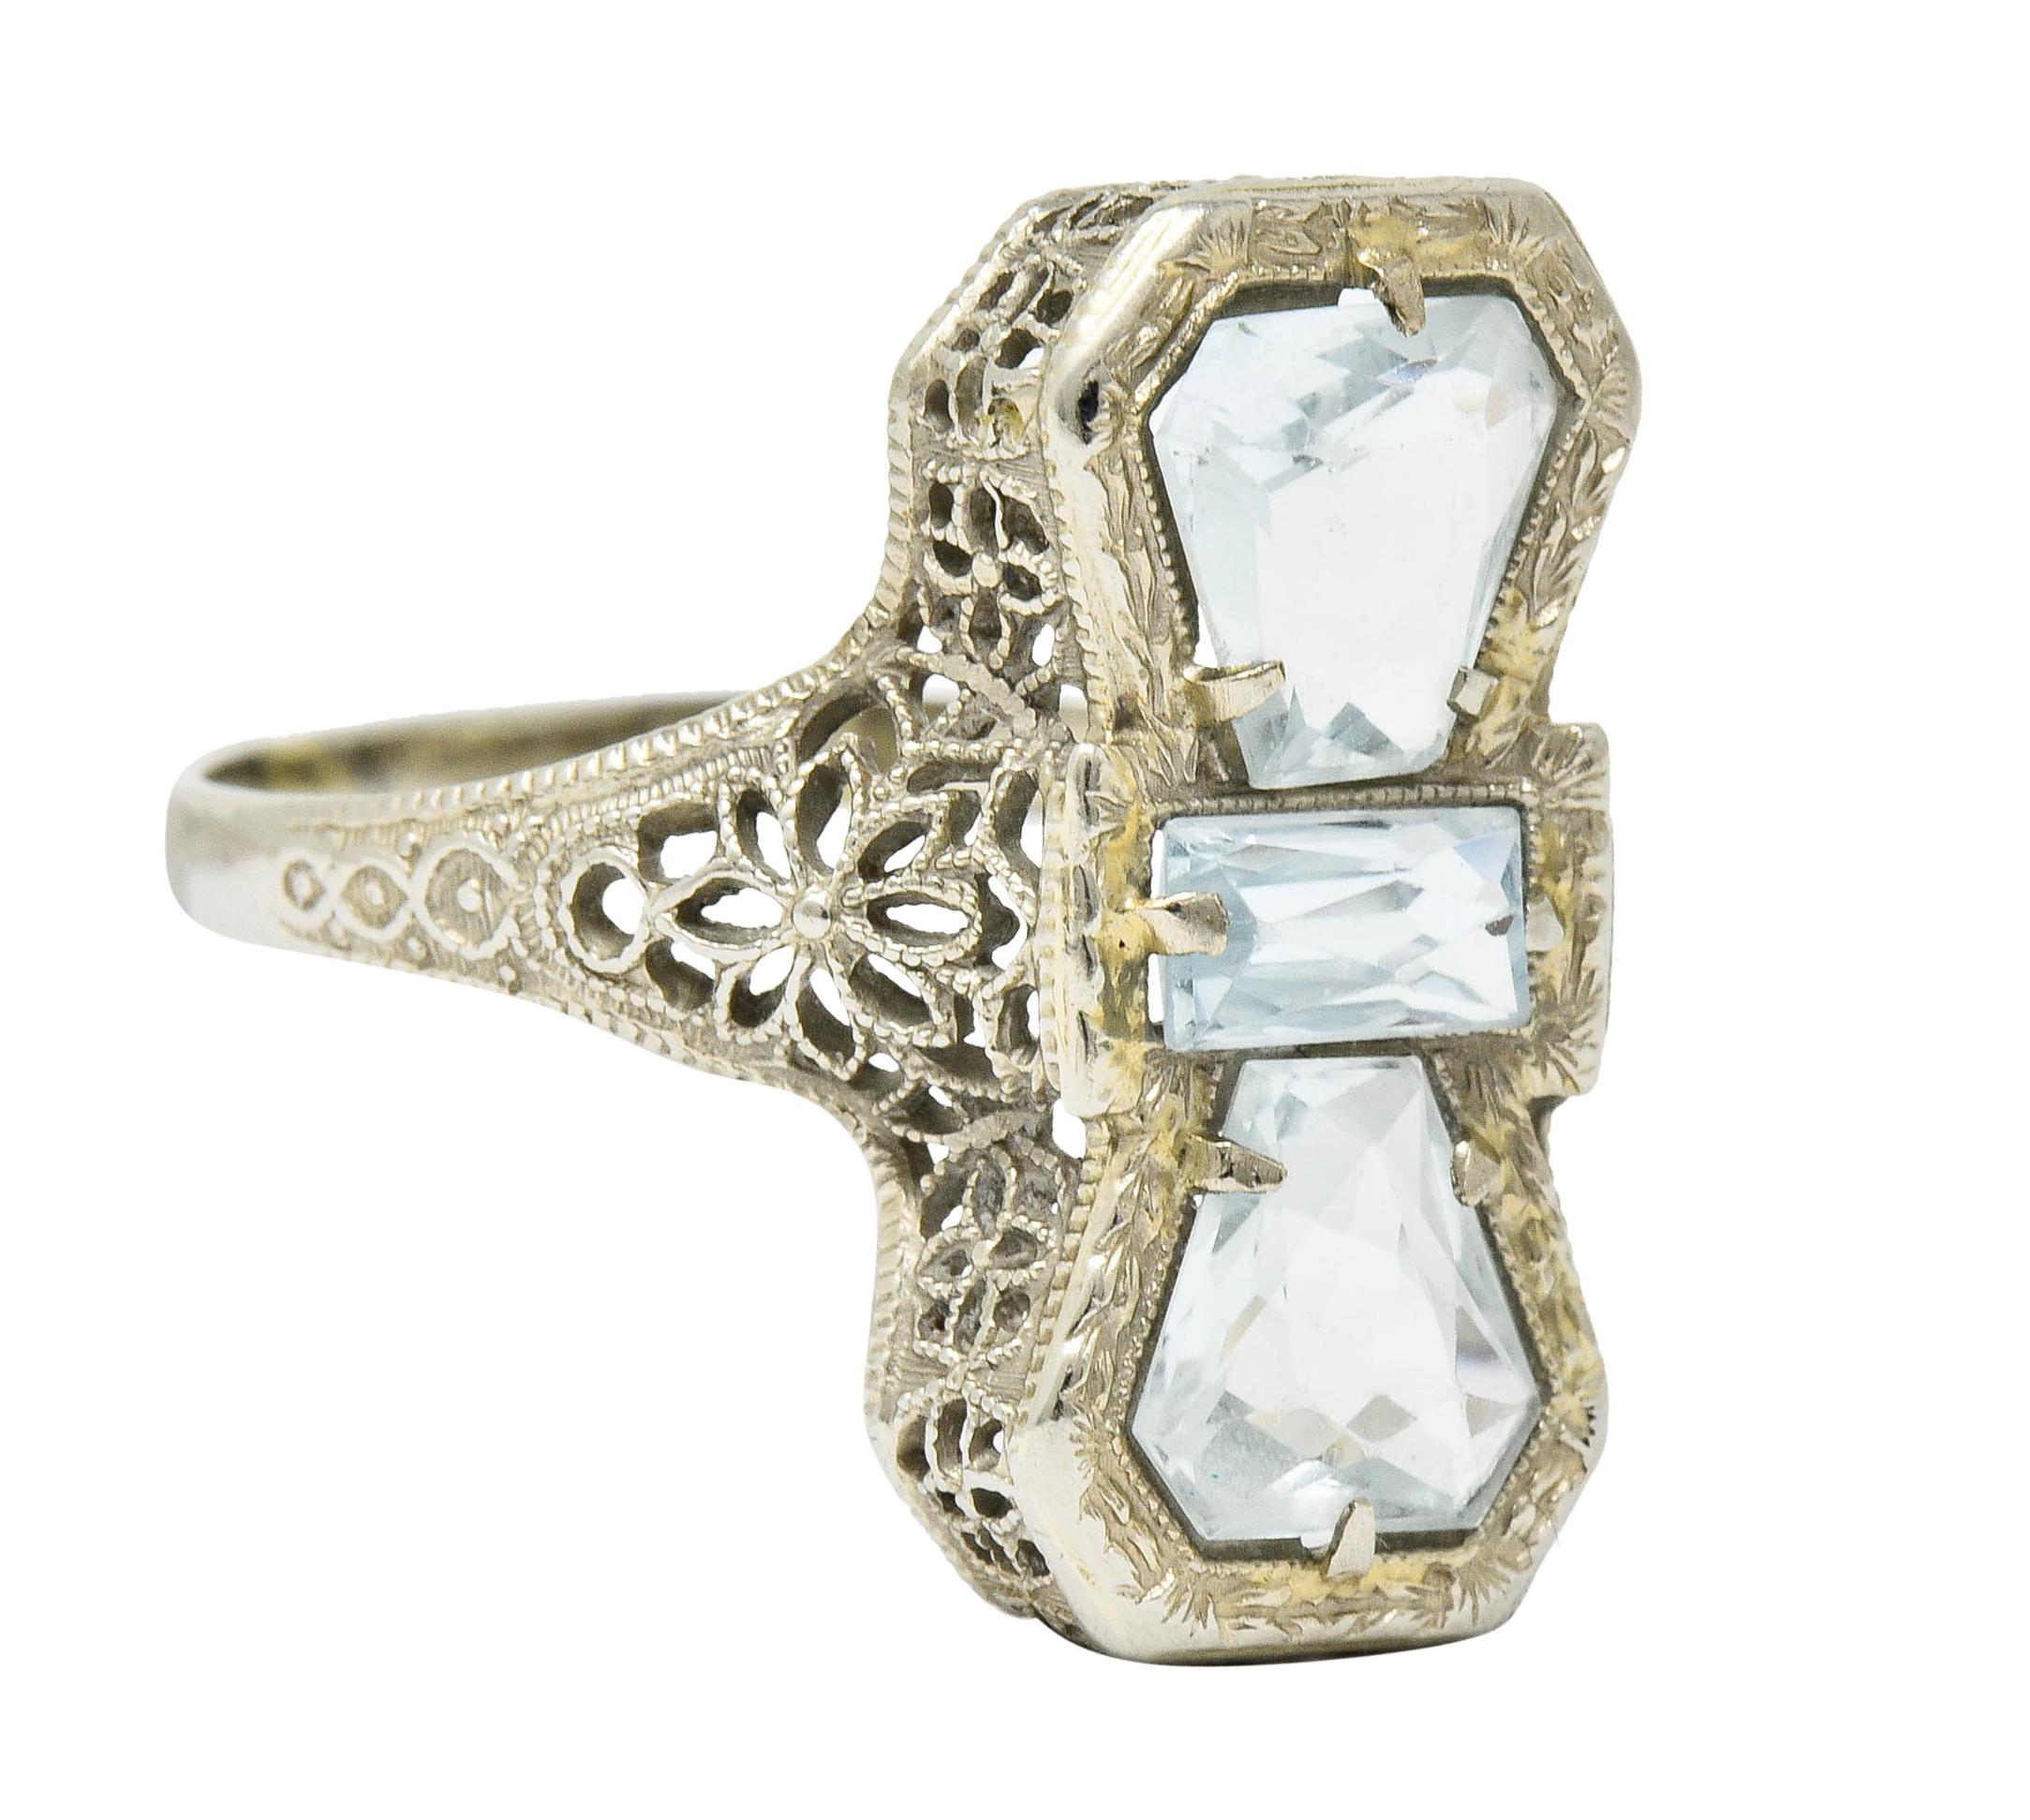 Hour glass shaped dinner ring features three fancily cut aquamarines

Very well-matched in very light greenish-blue color

Mounting is intricately pierced with floral motifs and accented by milgrain

Stamped 14K for 14 karat gold

Circa: 1930s

Ring